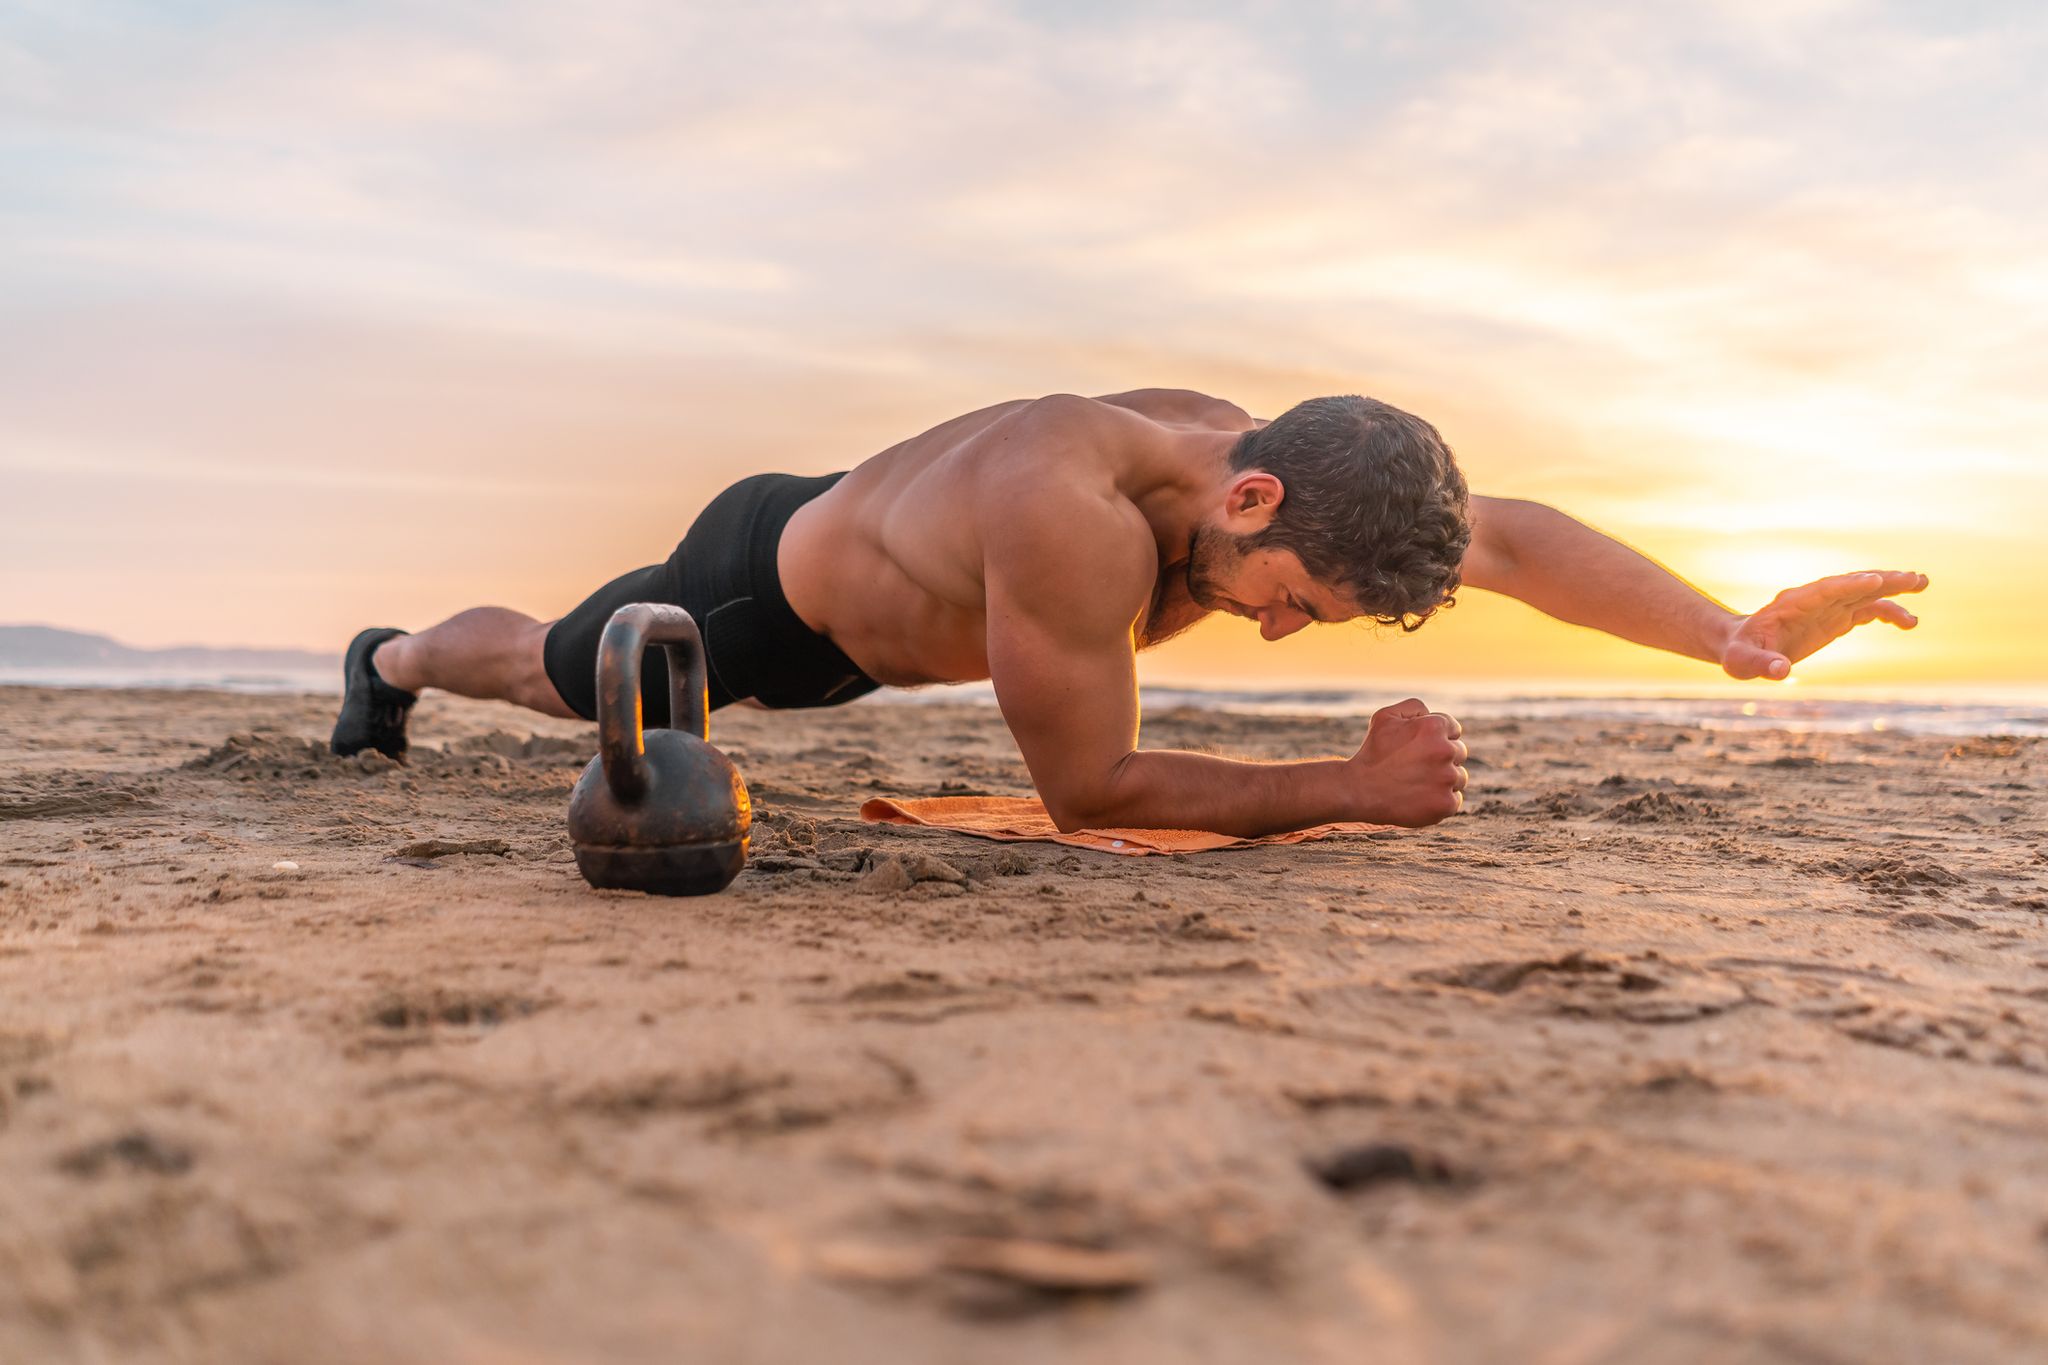 This 30-Day Plank Challenge Will Strengthen Your Entire Core